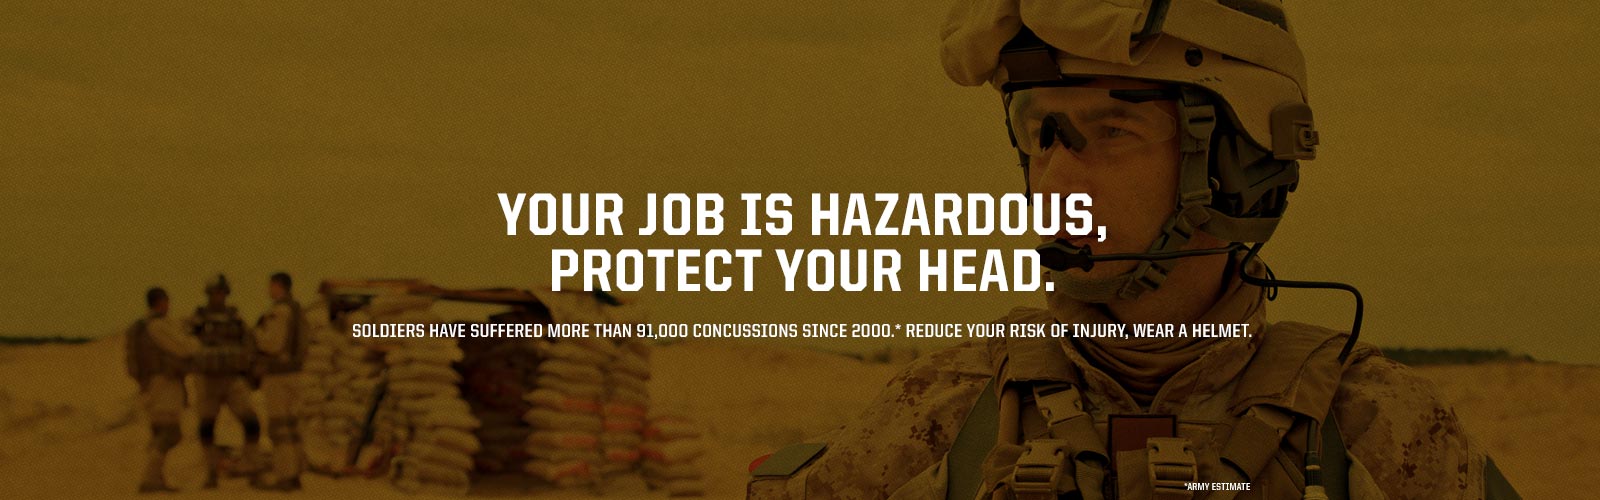 Soldiers Have Suffered More Than 91,000 Concussions Since 2000. Reduce Your Risk of Injury, Wear a Helmet.